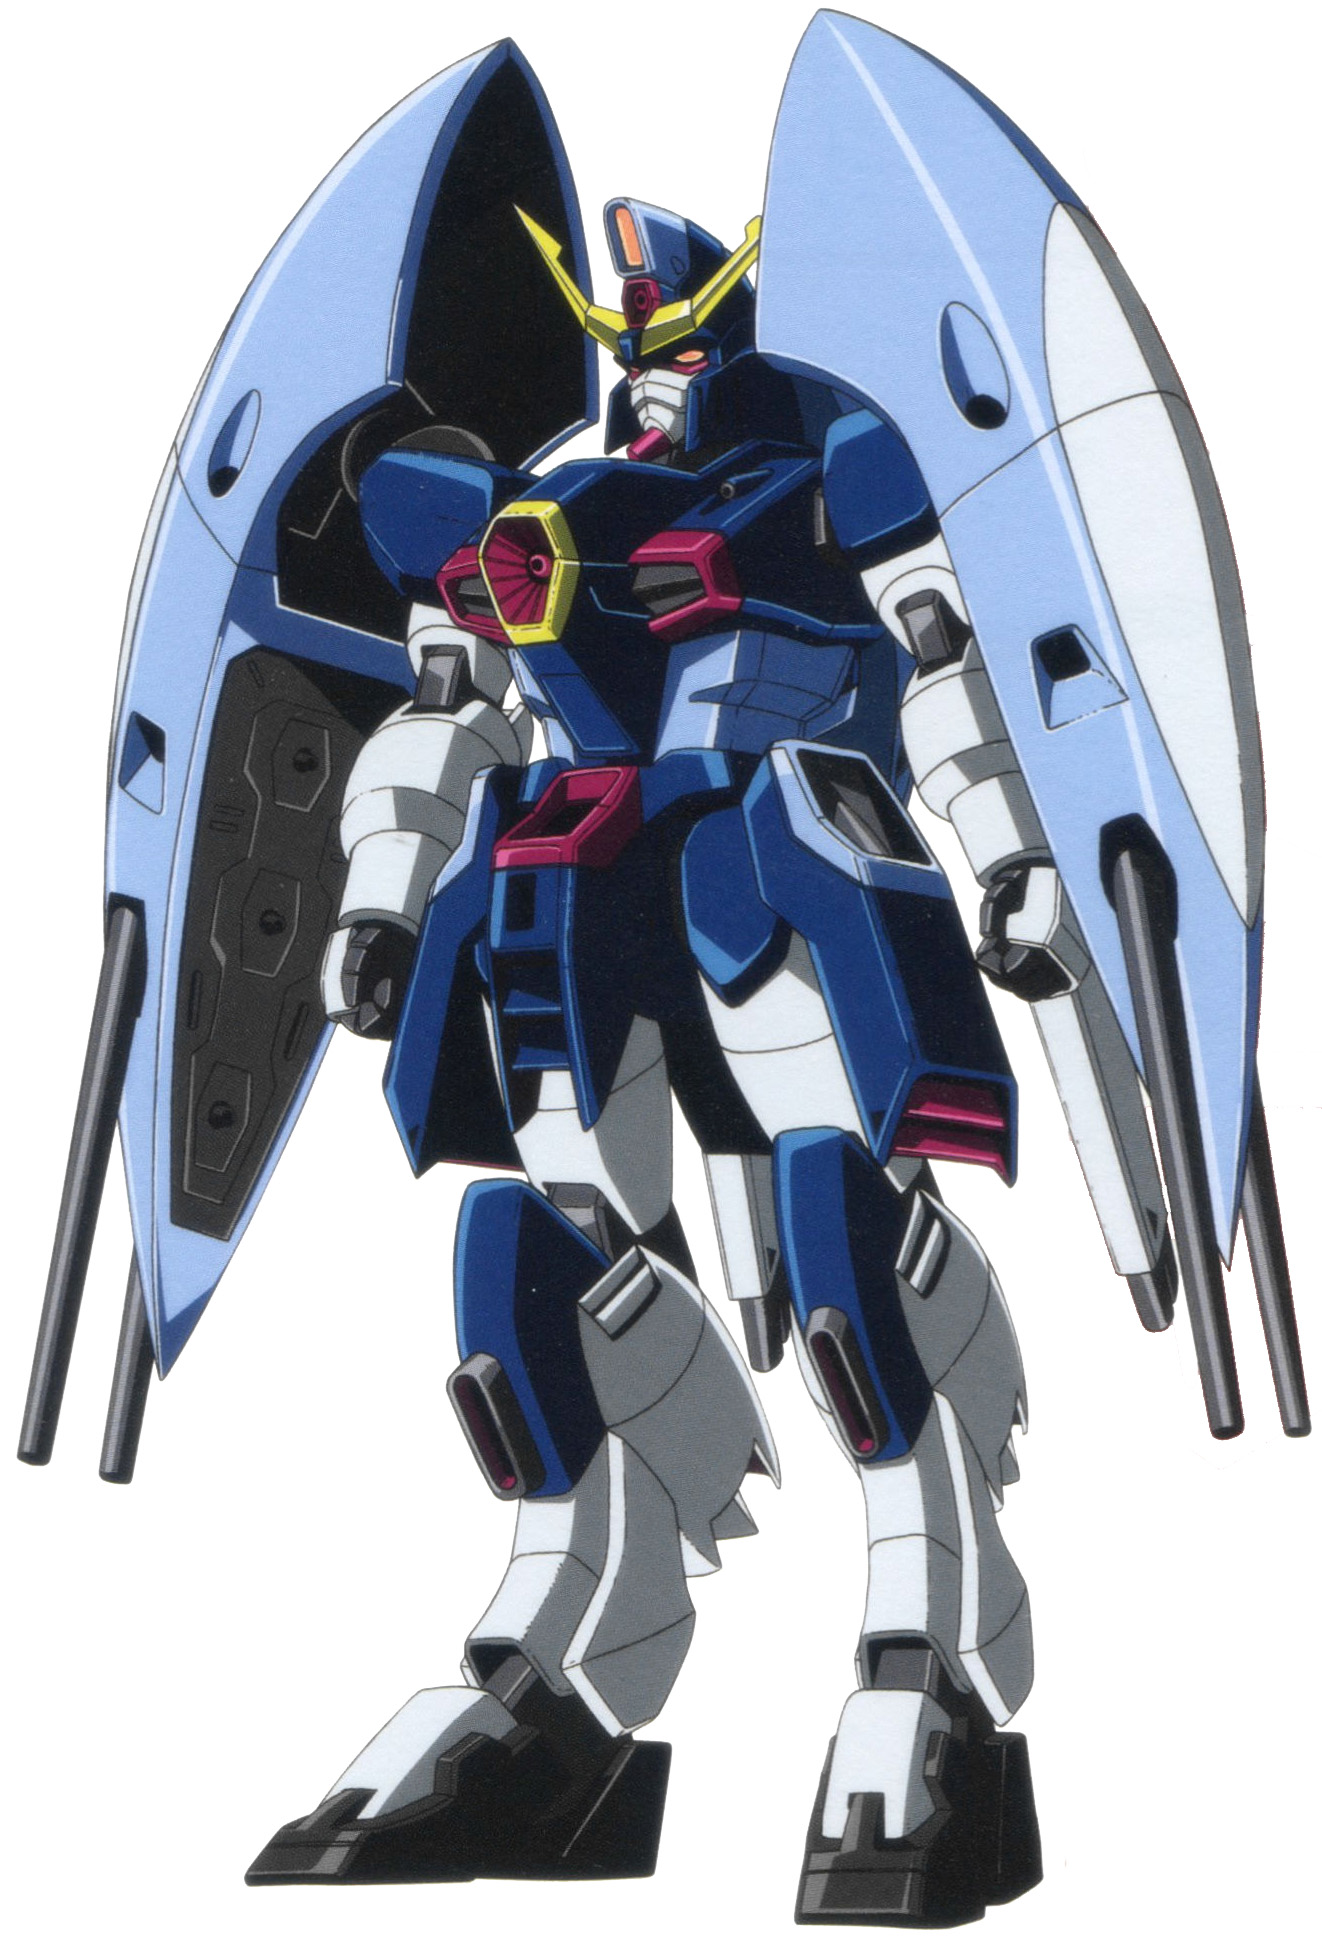 The ZGMF-X31S Abyss Gundam is a prototype transformable amphibious